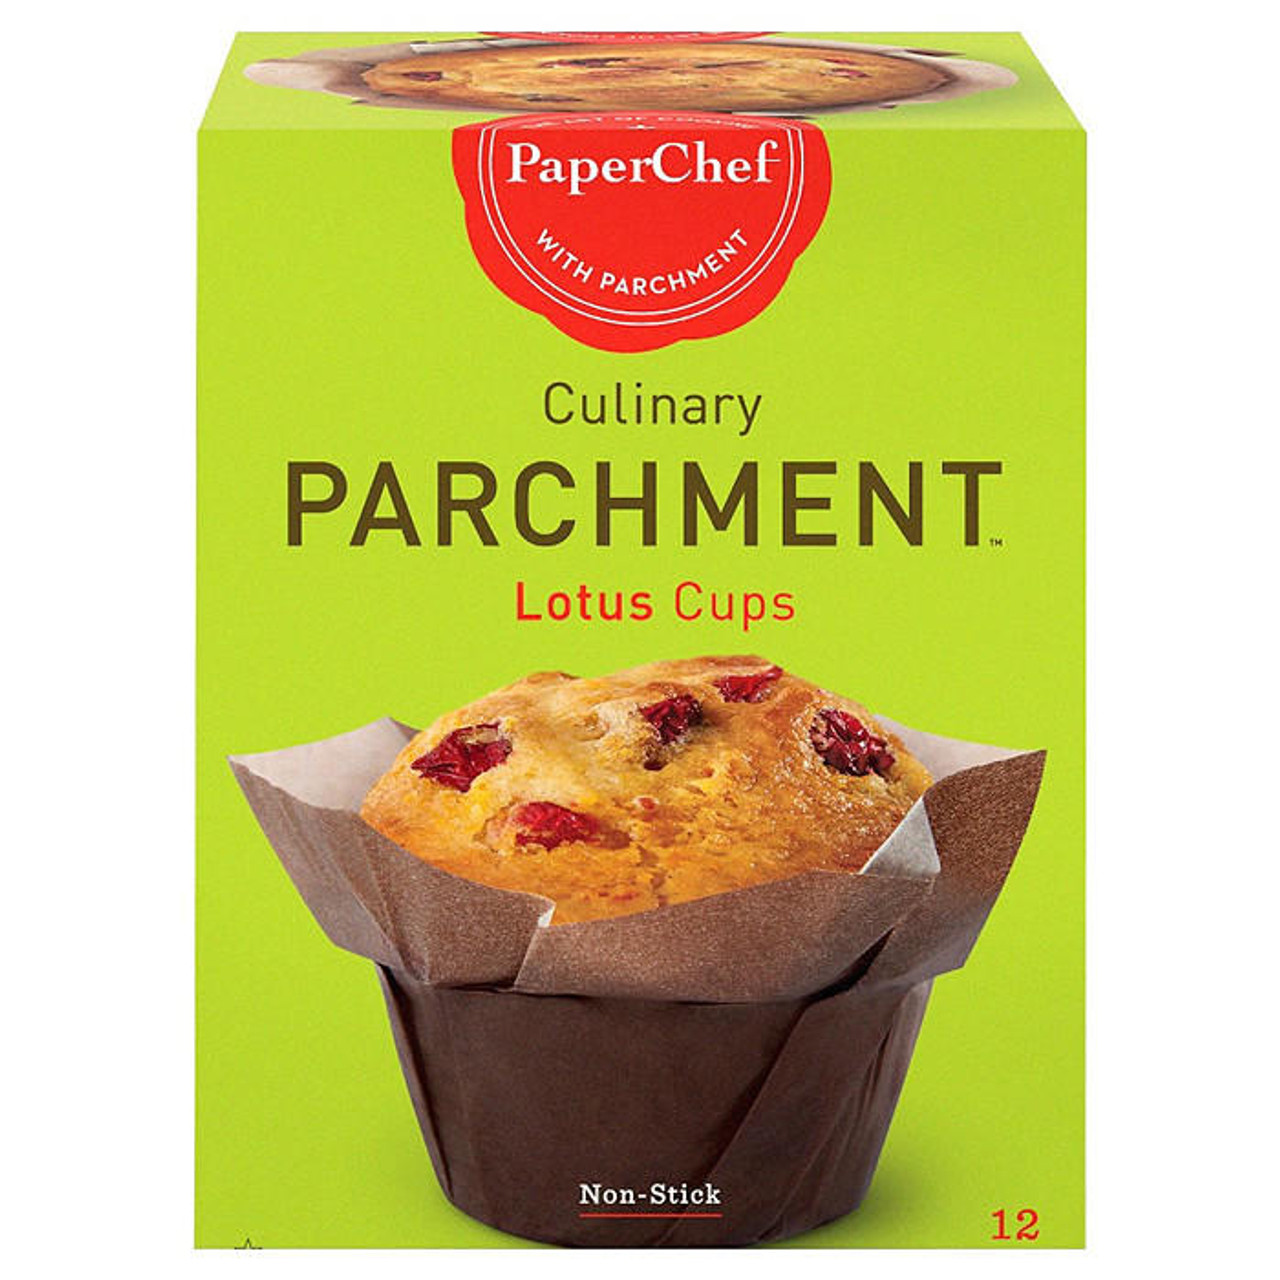 PaperChef Culinary Parchment Large Baking Cups - 12 pack, 60 count each